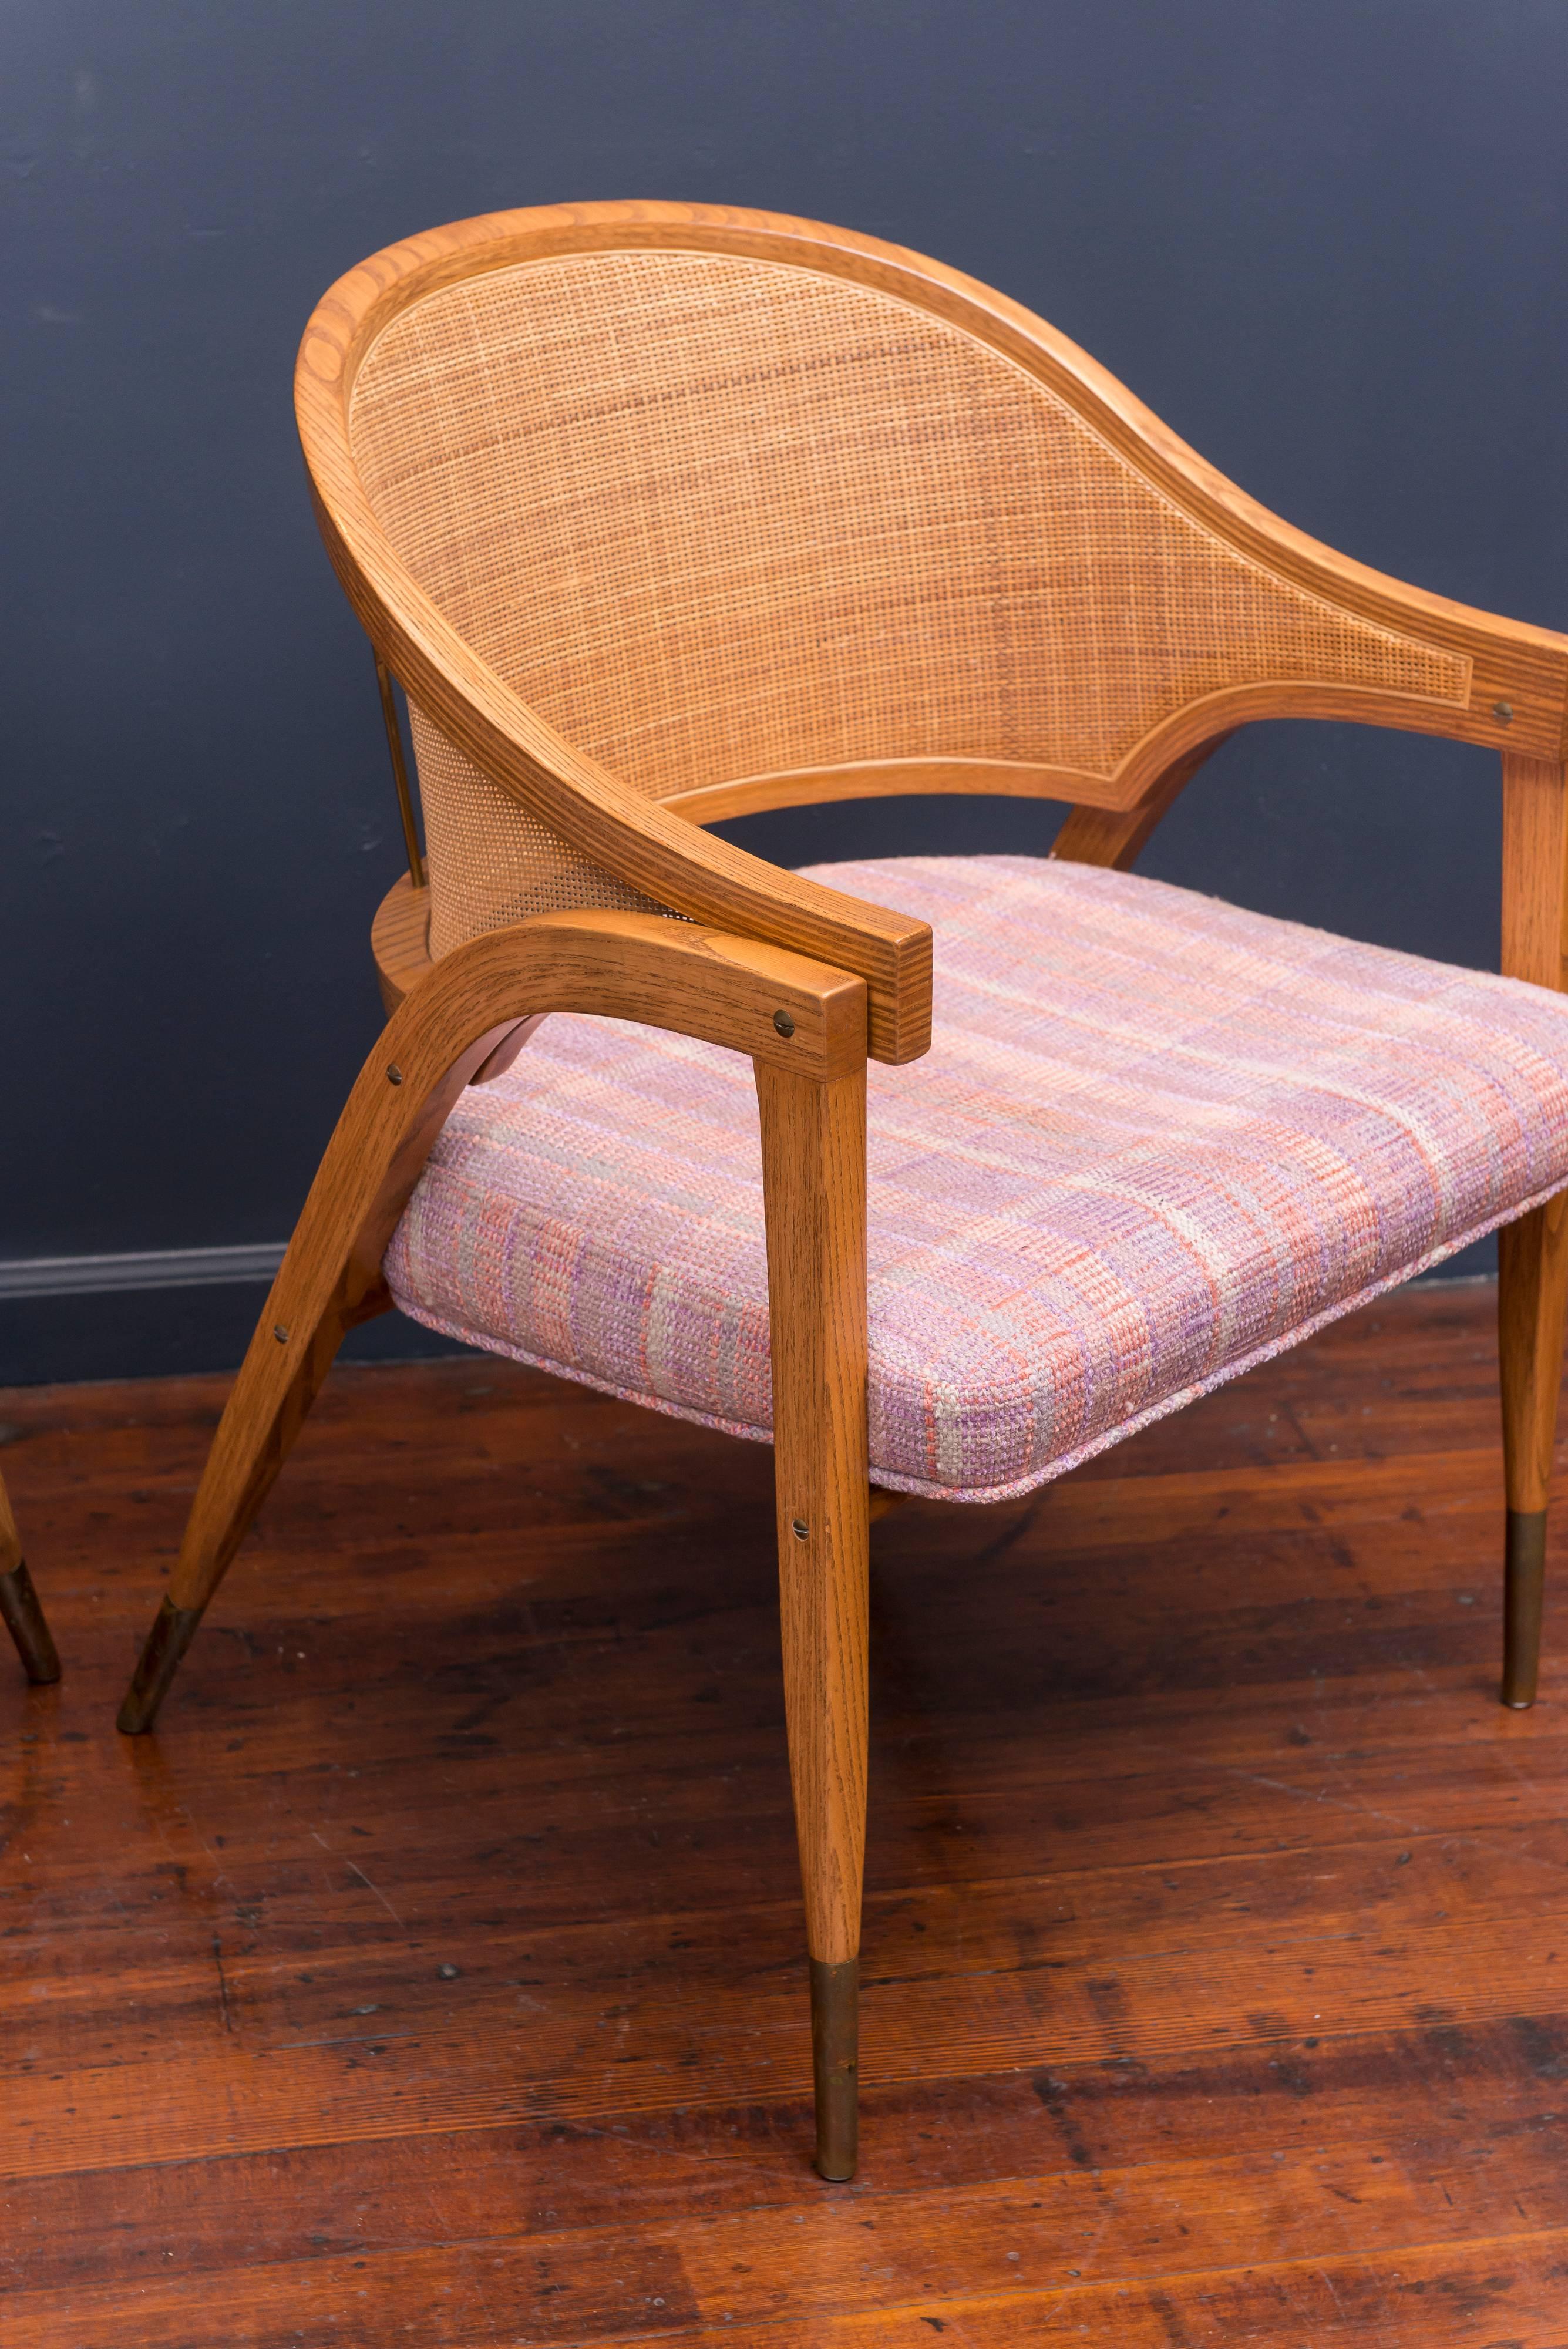 Elegant design armchair by Edward Wormley for Dunbar Furniture co. Berne Indiana Model 5480. Excellent original condition examples made from oak with caned backs and brass sabots. Sold in pairs only, two available.